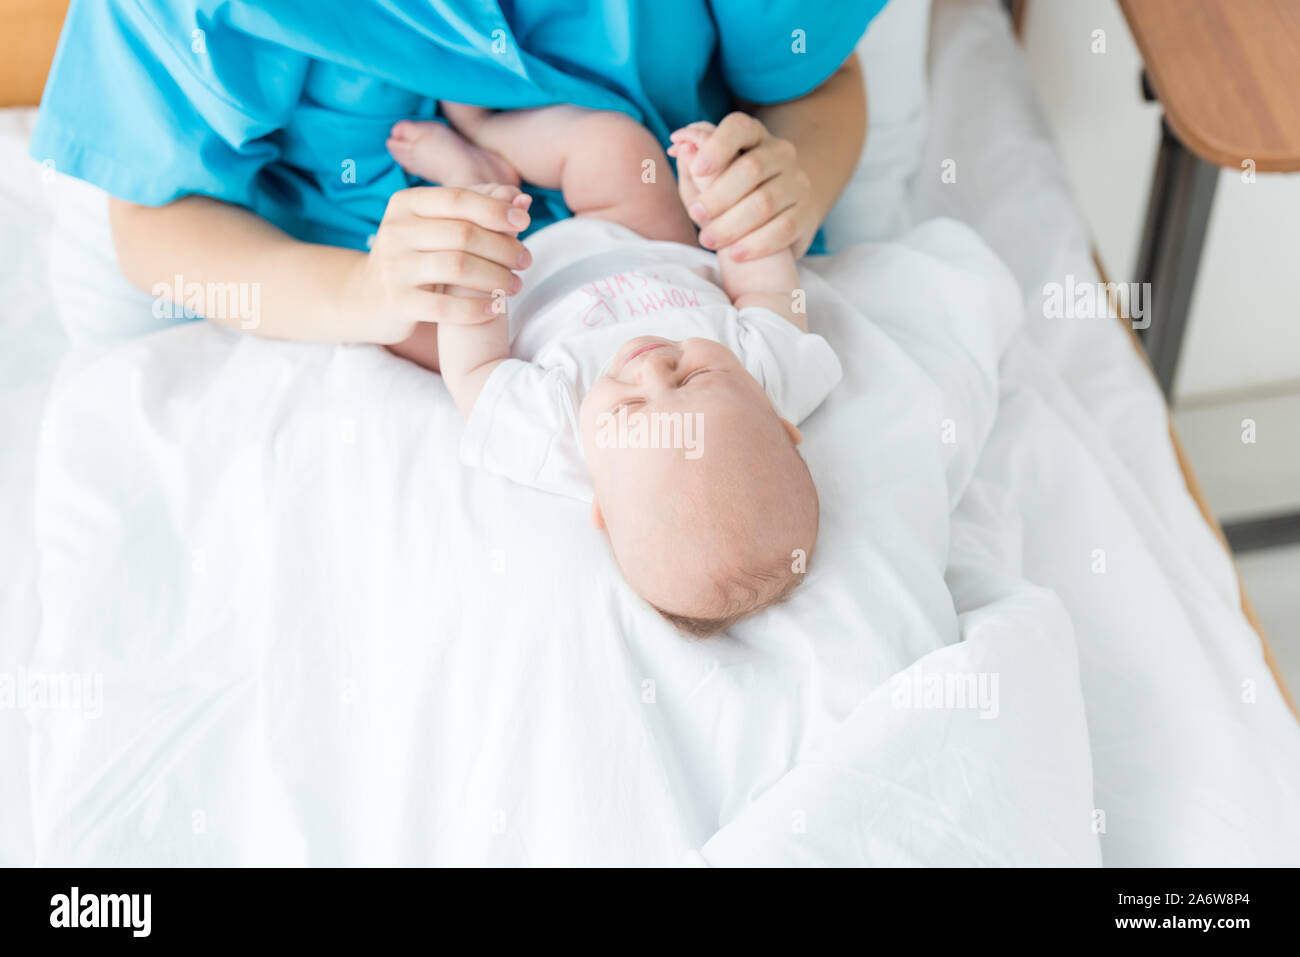 Young Beautiful Blonde Mother Breastfeeding Her Stock Photo 1064021588